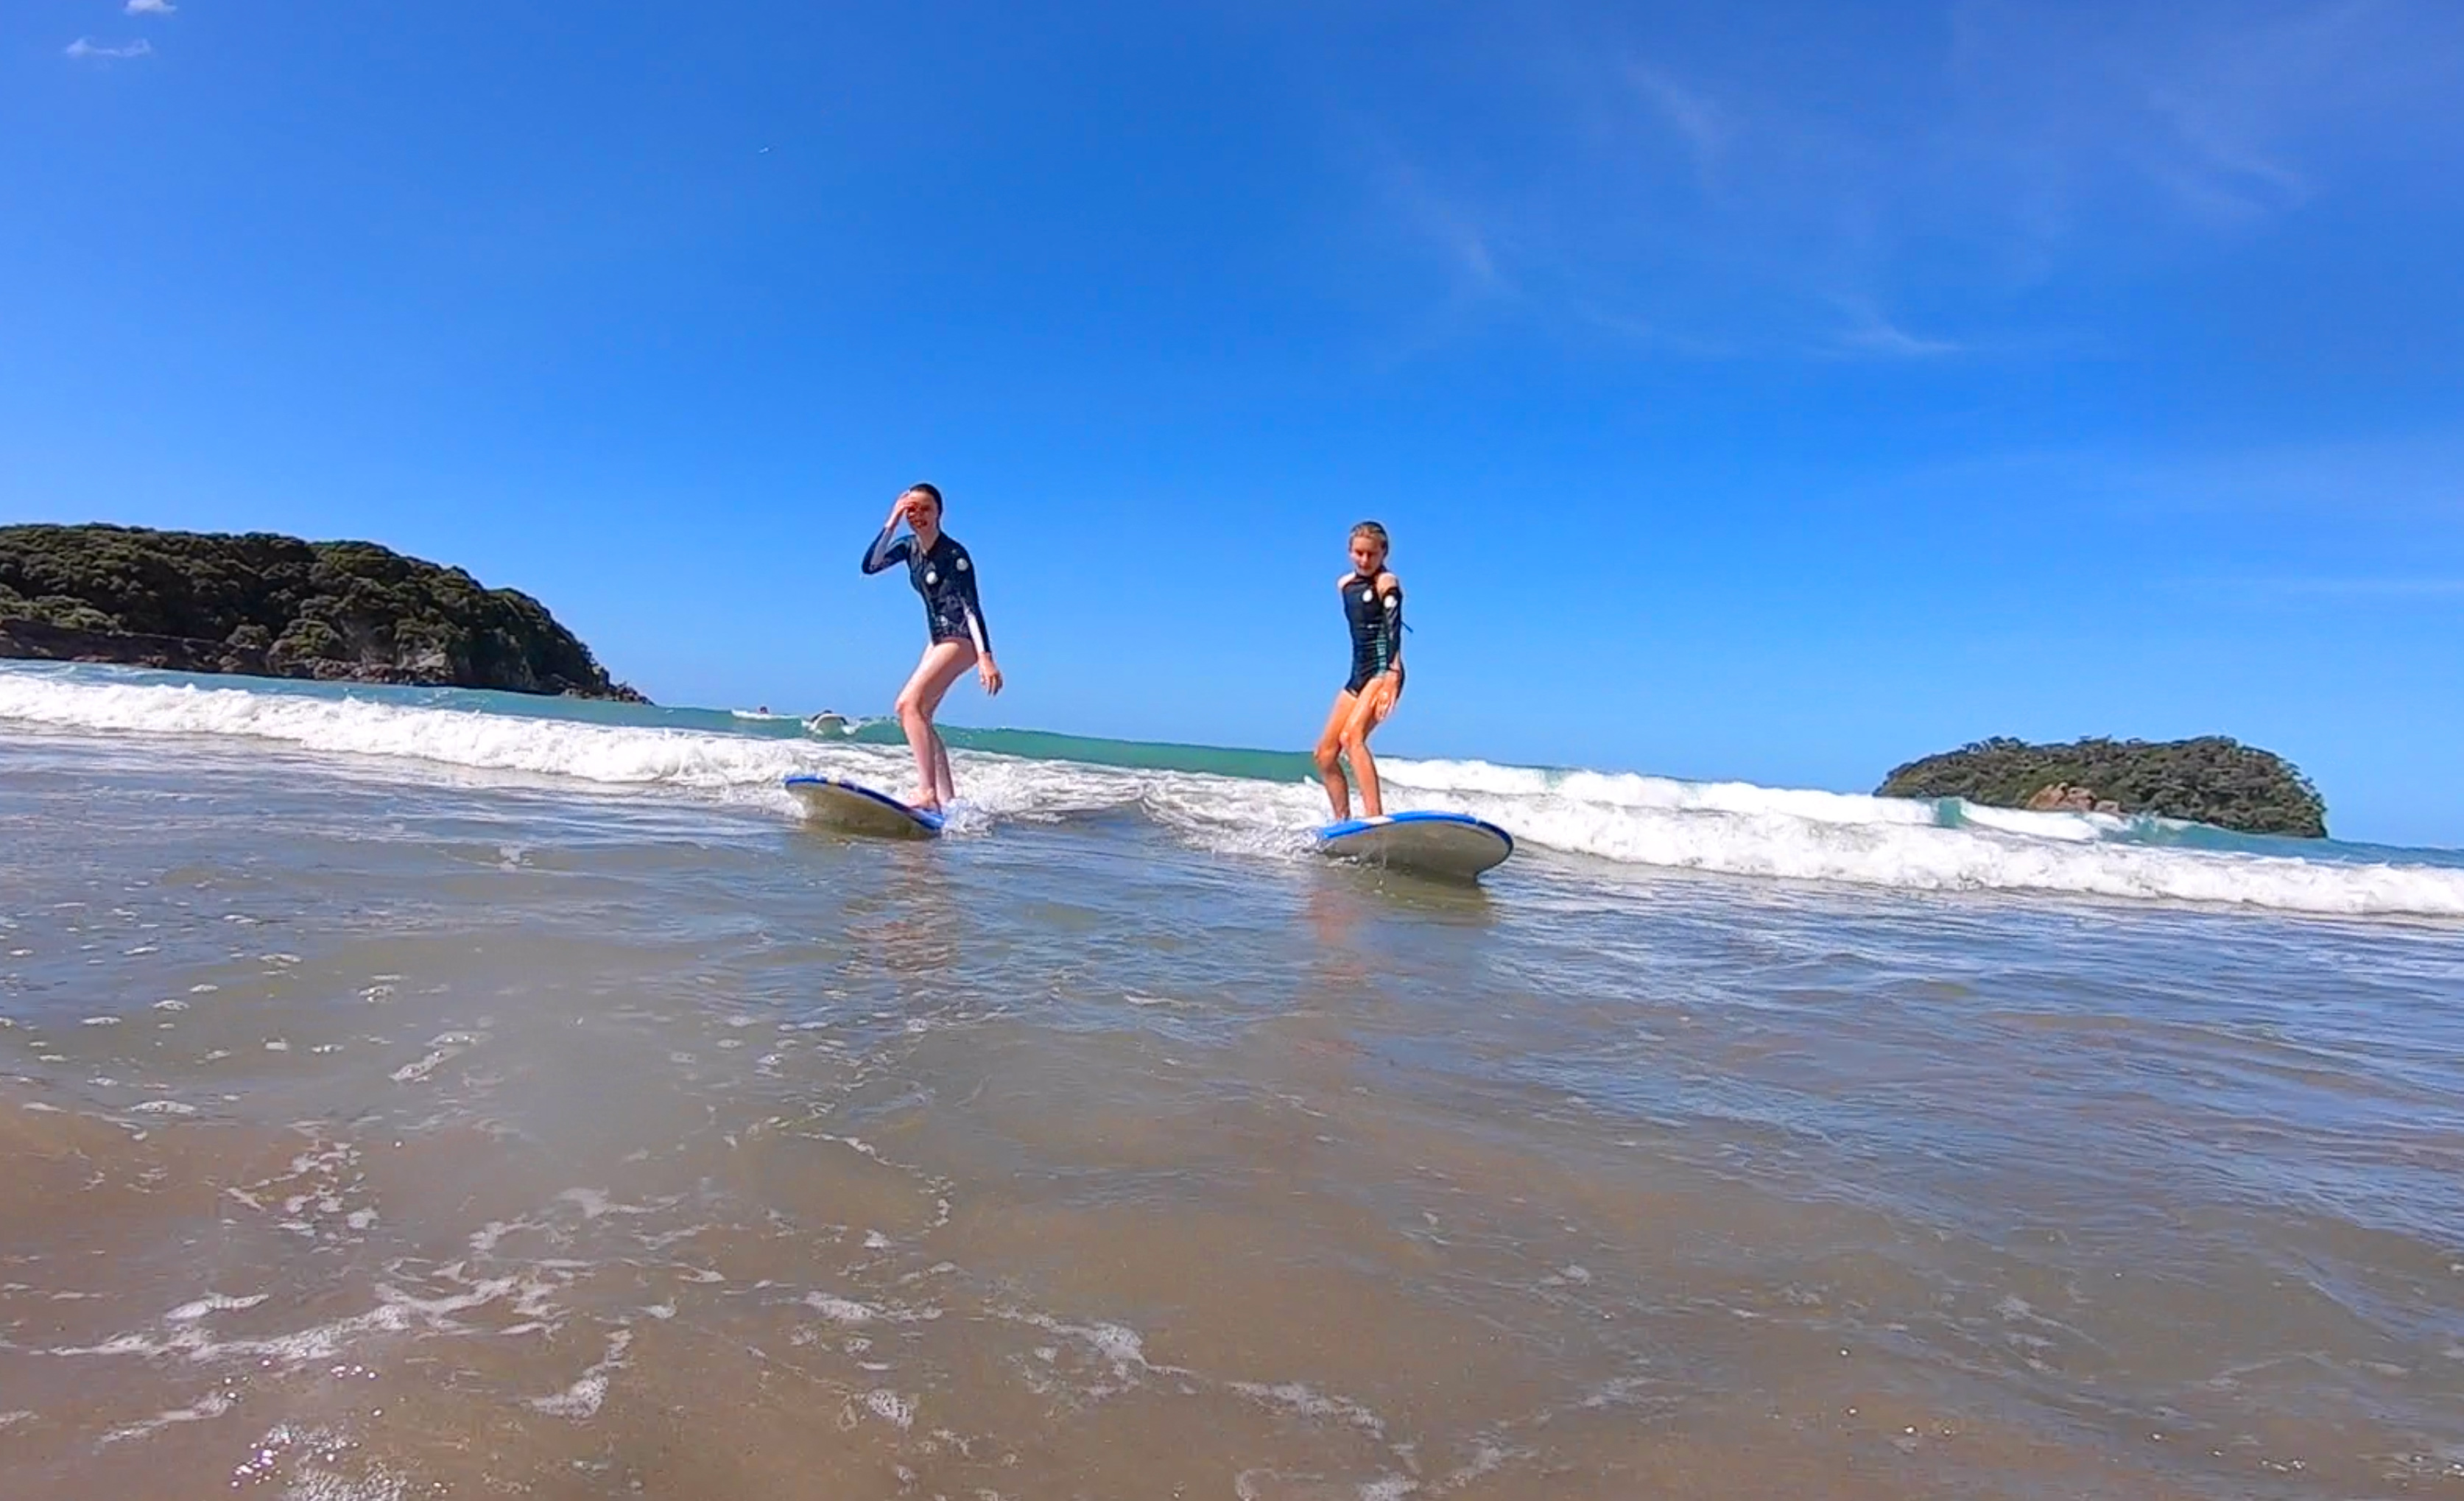 Grace and Sophie catching waves and learning to surf PC: Surf2Surf